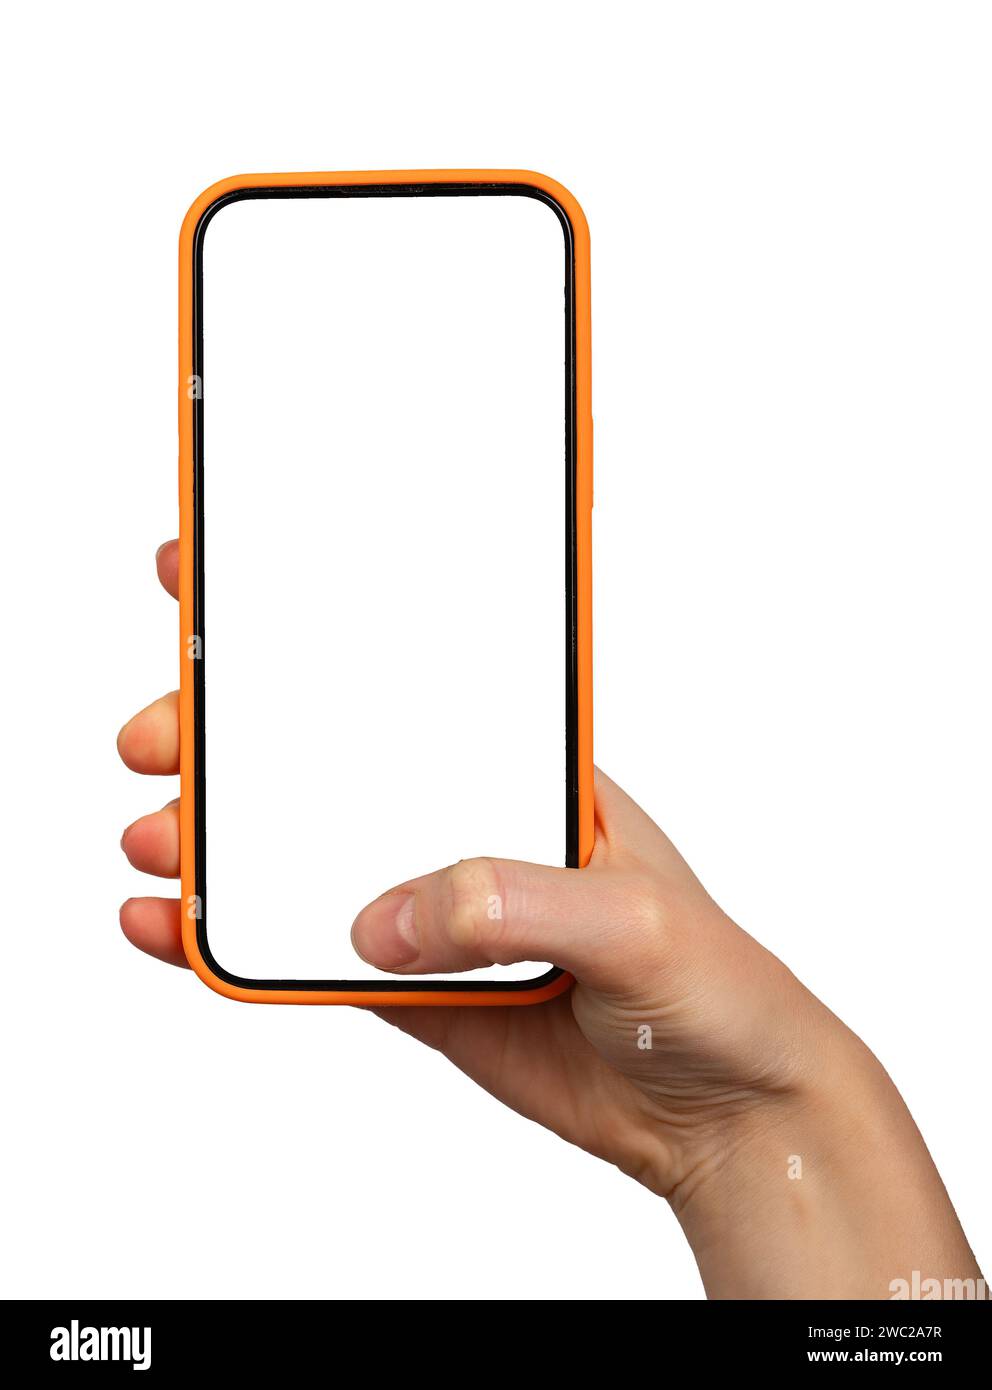 Thumb tapping on phone screen mockup. Finger clicking on smartphone mock up isolated on white Stock Photo